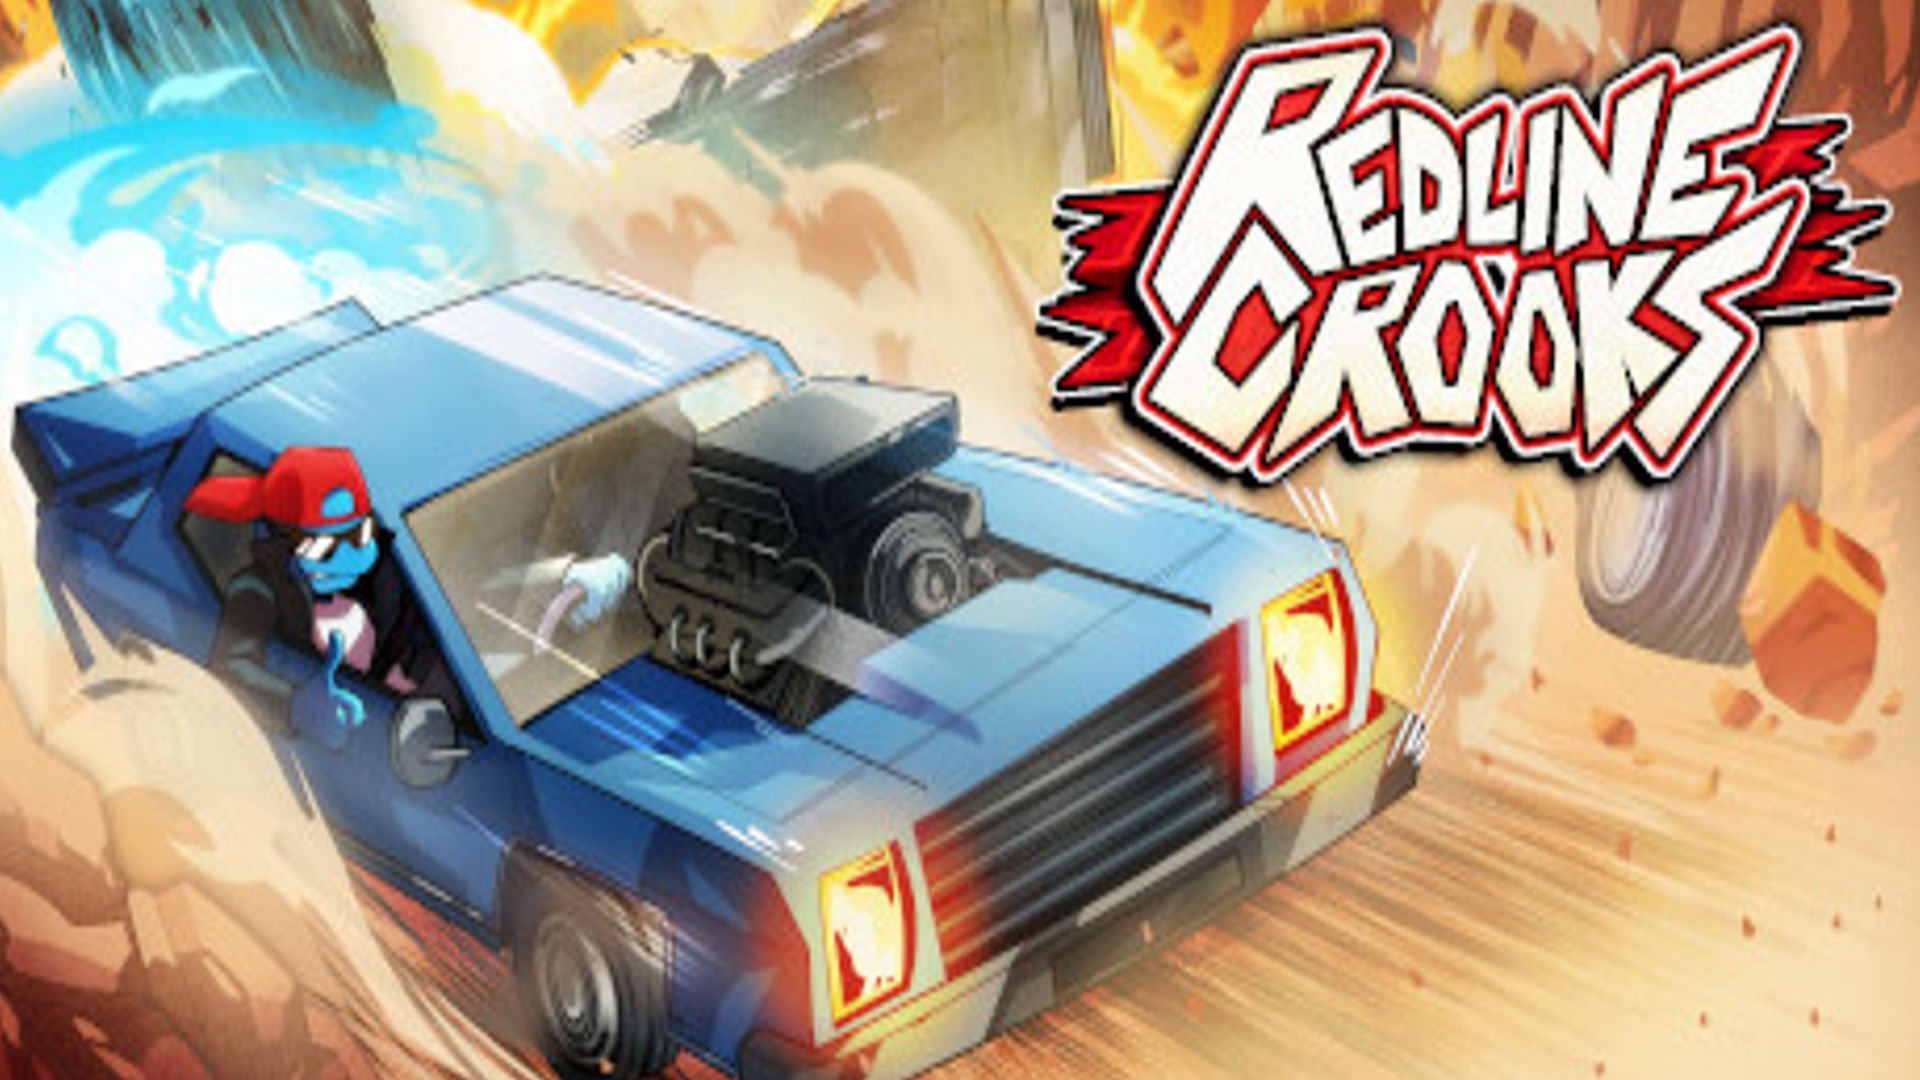 Classic Driving Game, Super Cars, Gets a Roguelite Makeover in Redline Crooks